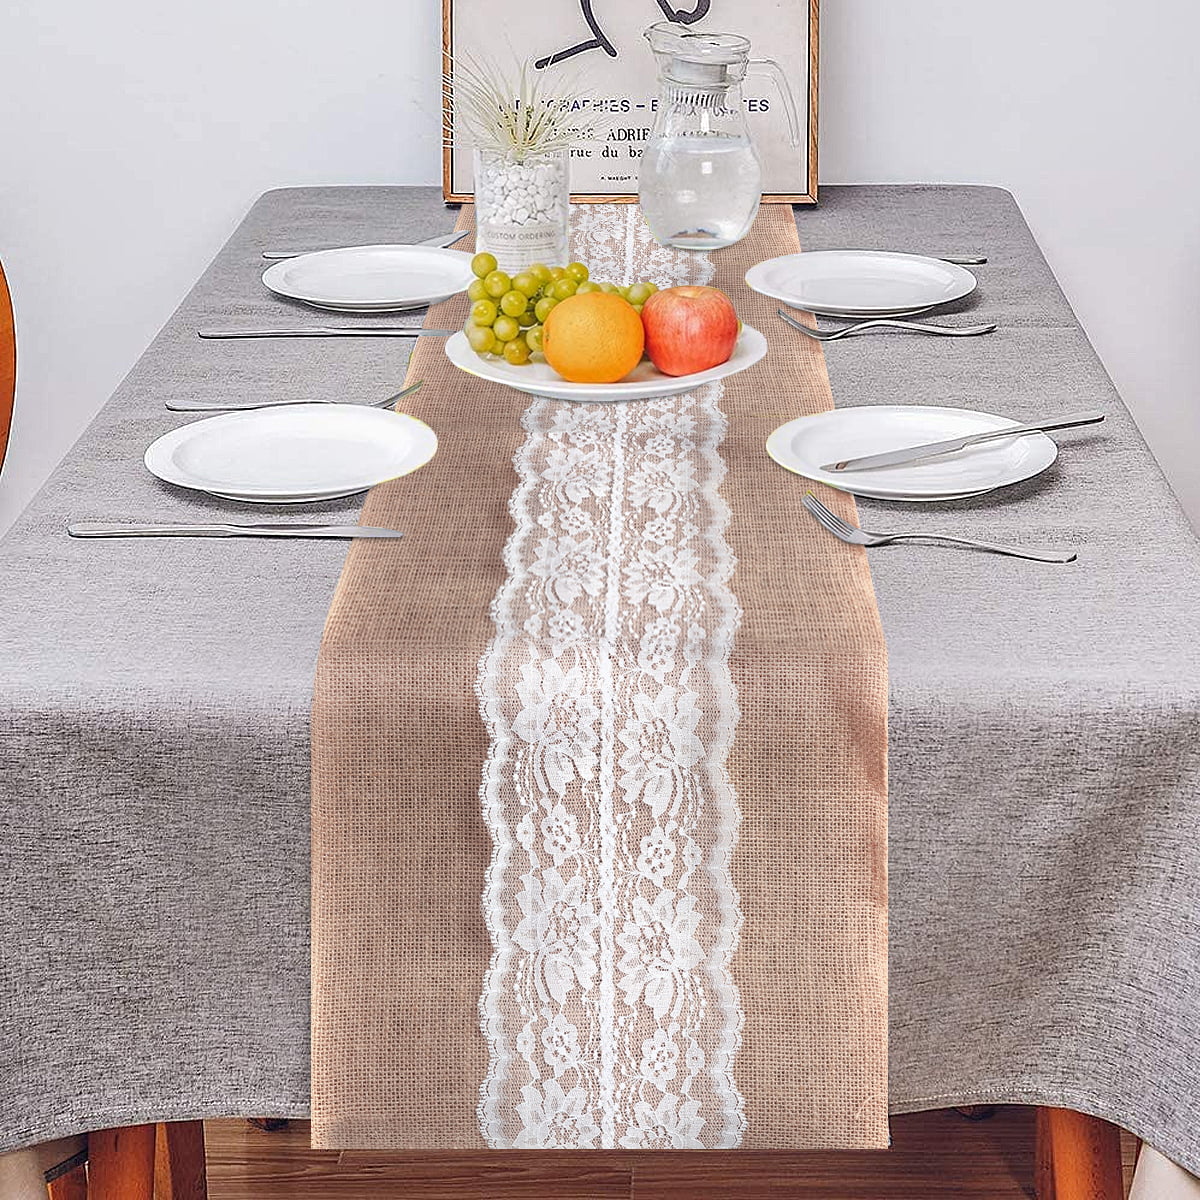 10x Hessian Burlap Lace Table Runner Tablecloth for Rustic Wedding Party Decor 